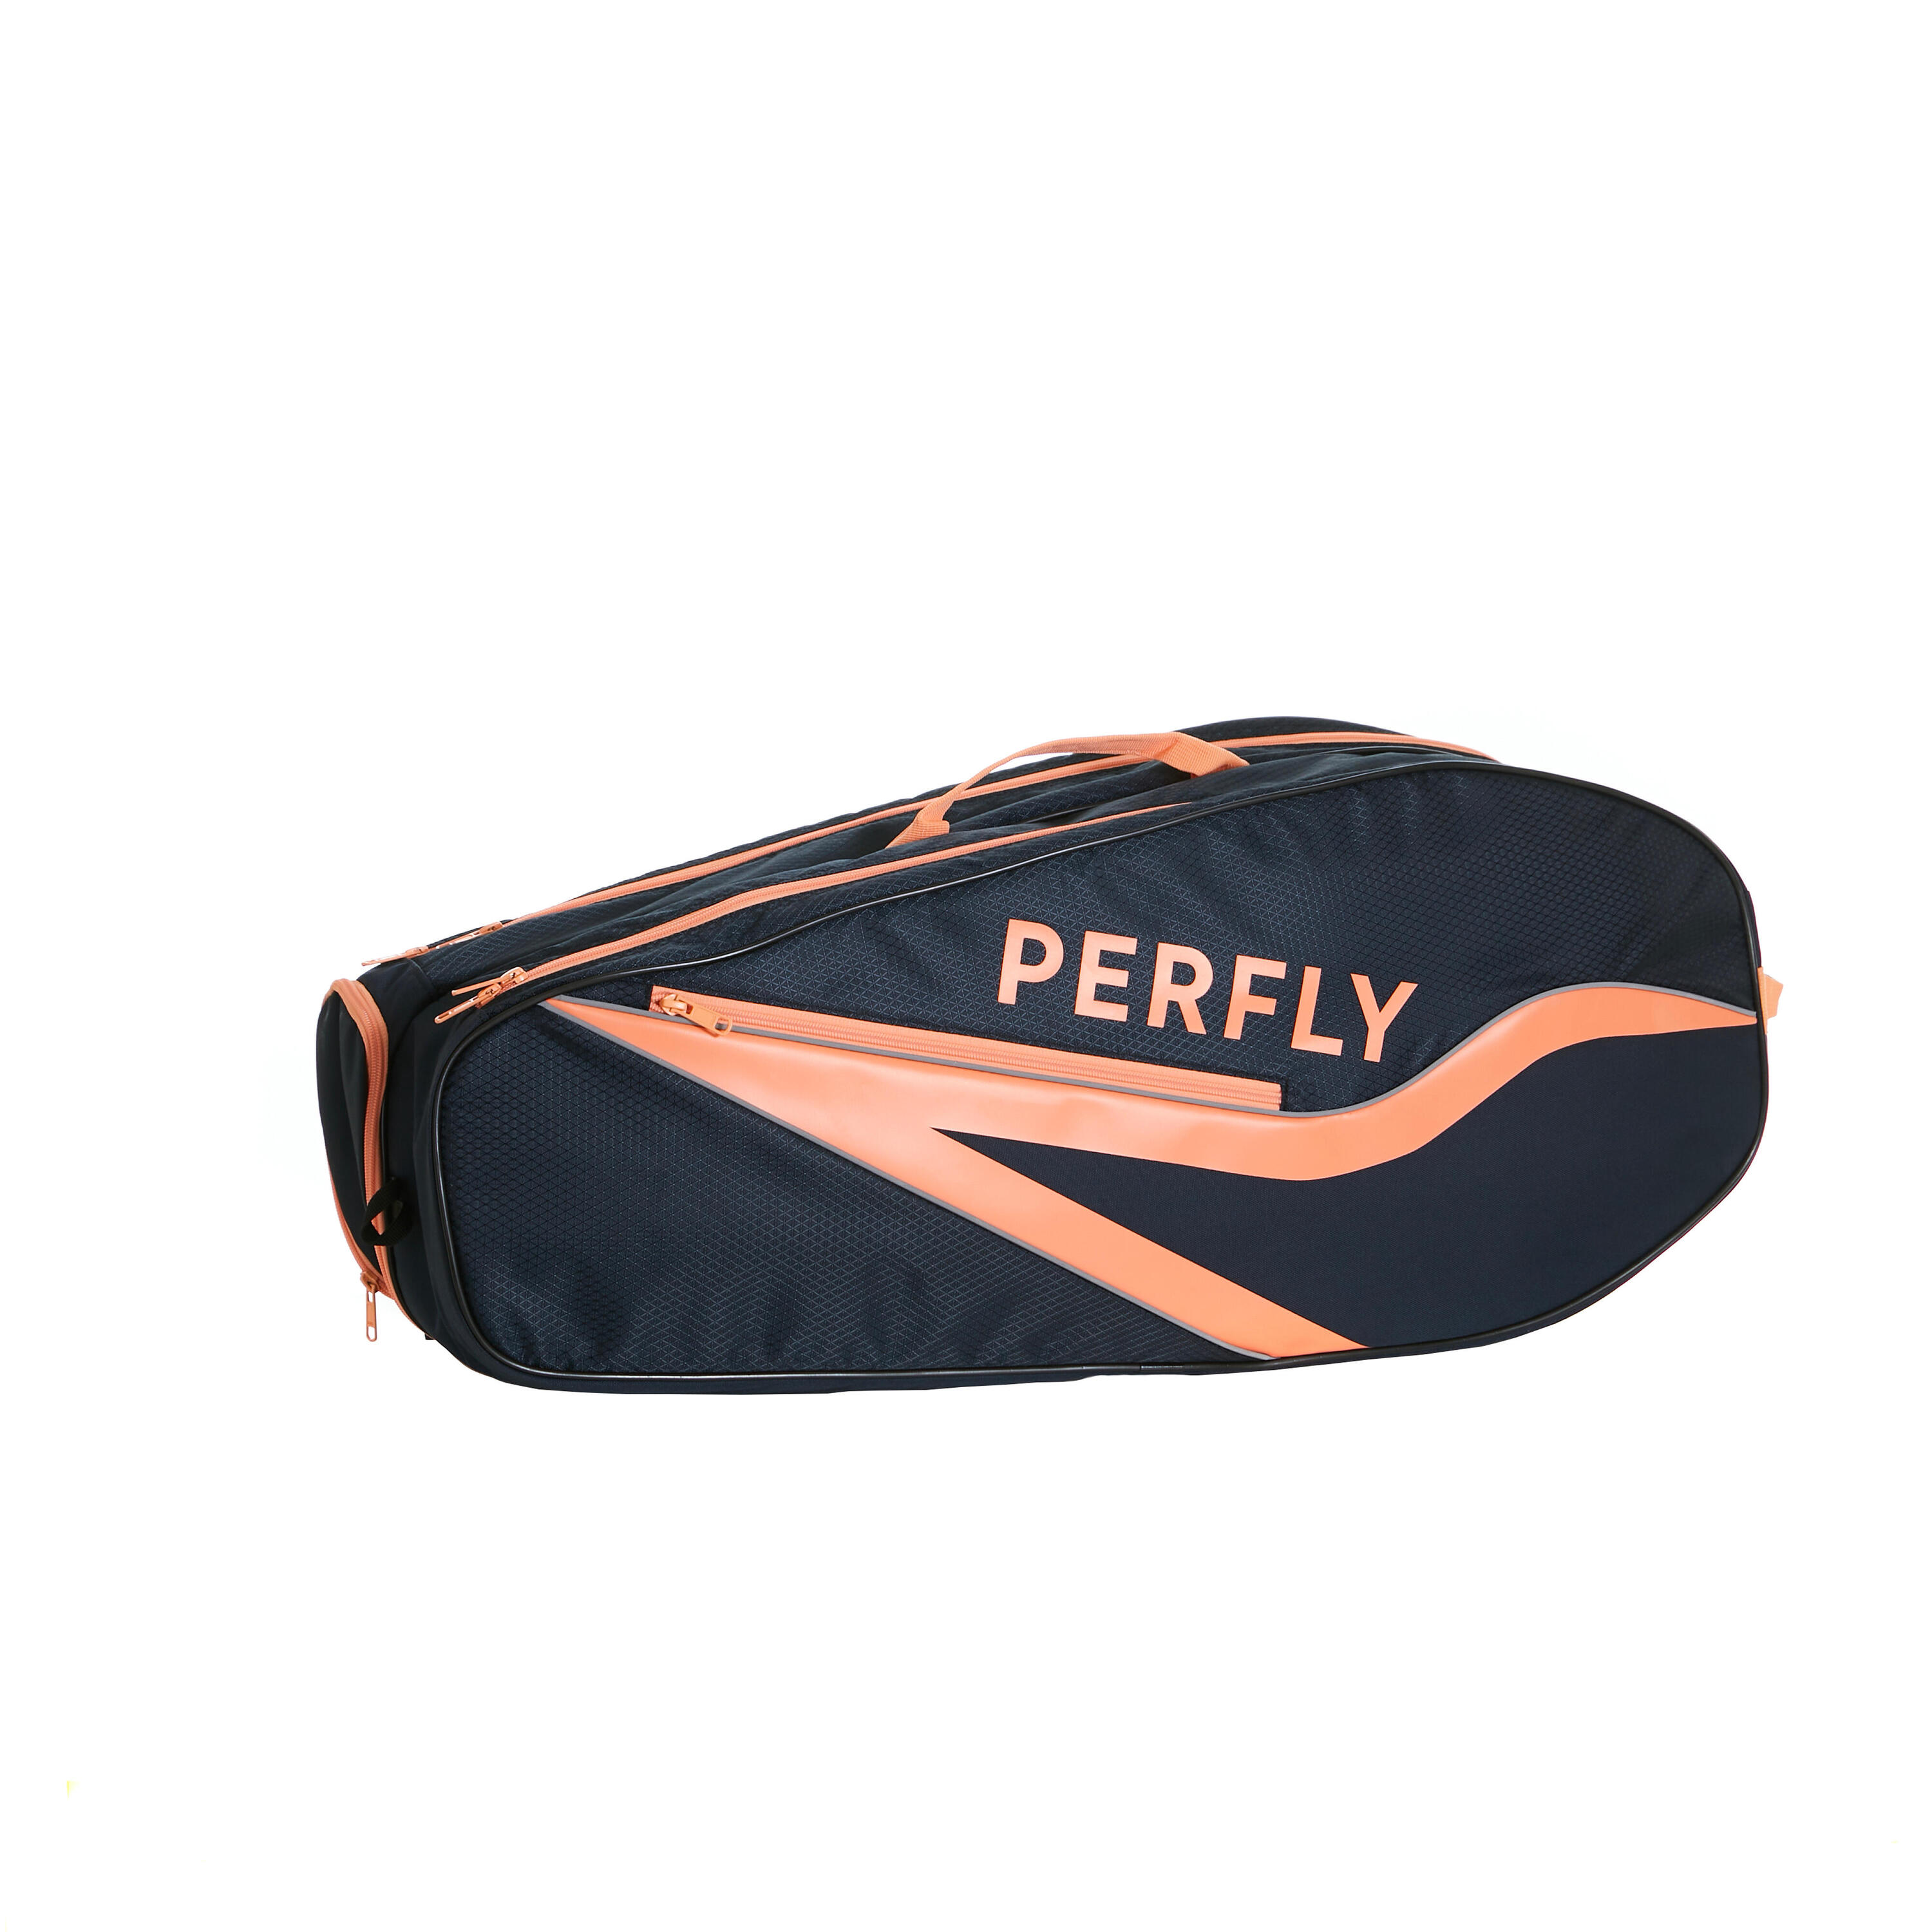 PERFLY ADULT BADMINTON BAG 560 ANTHRACITE